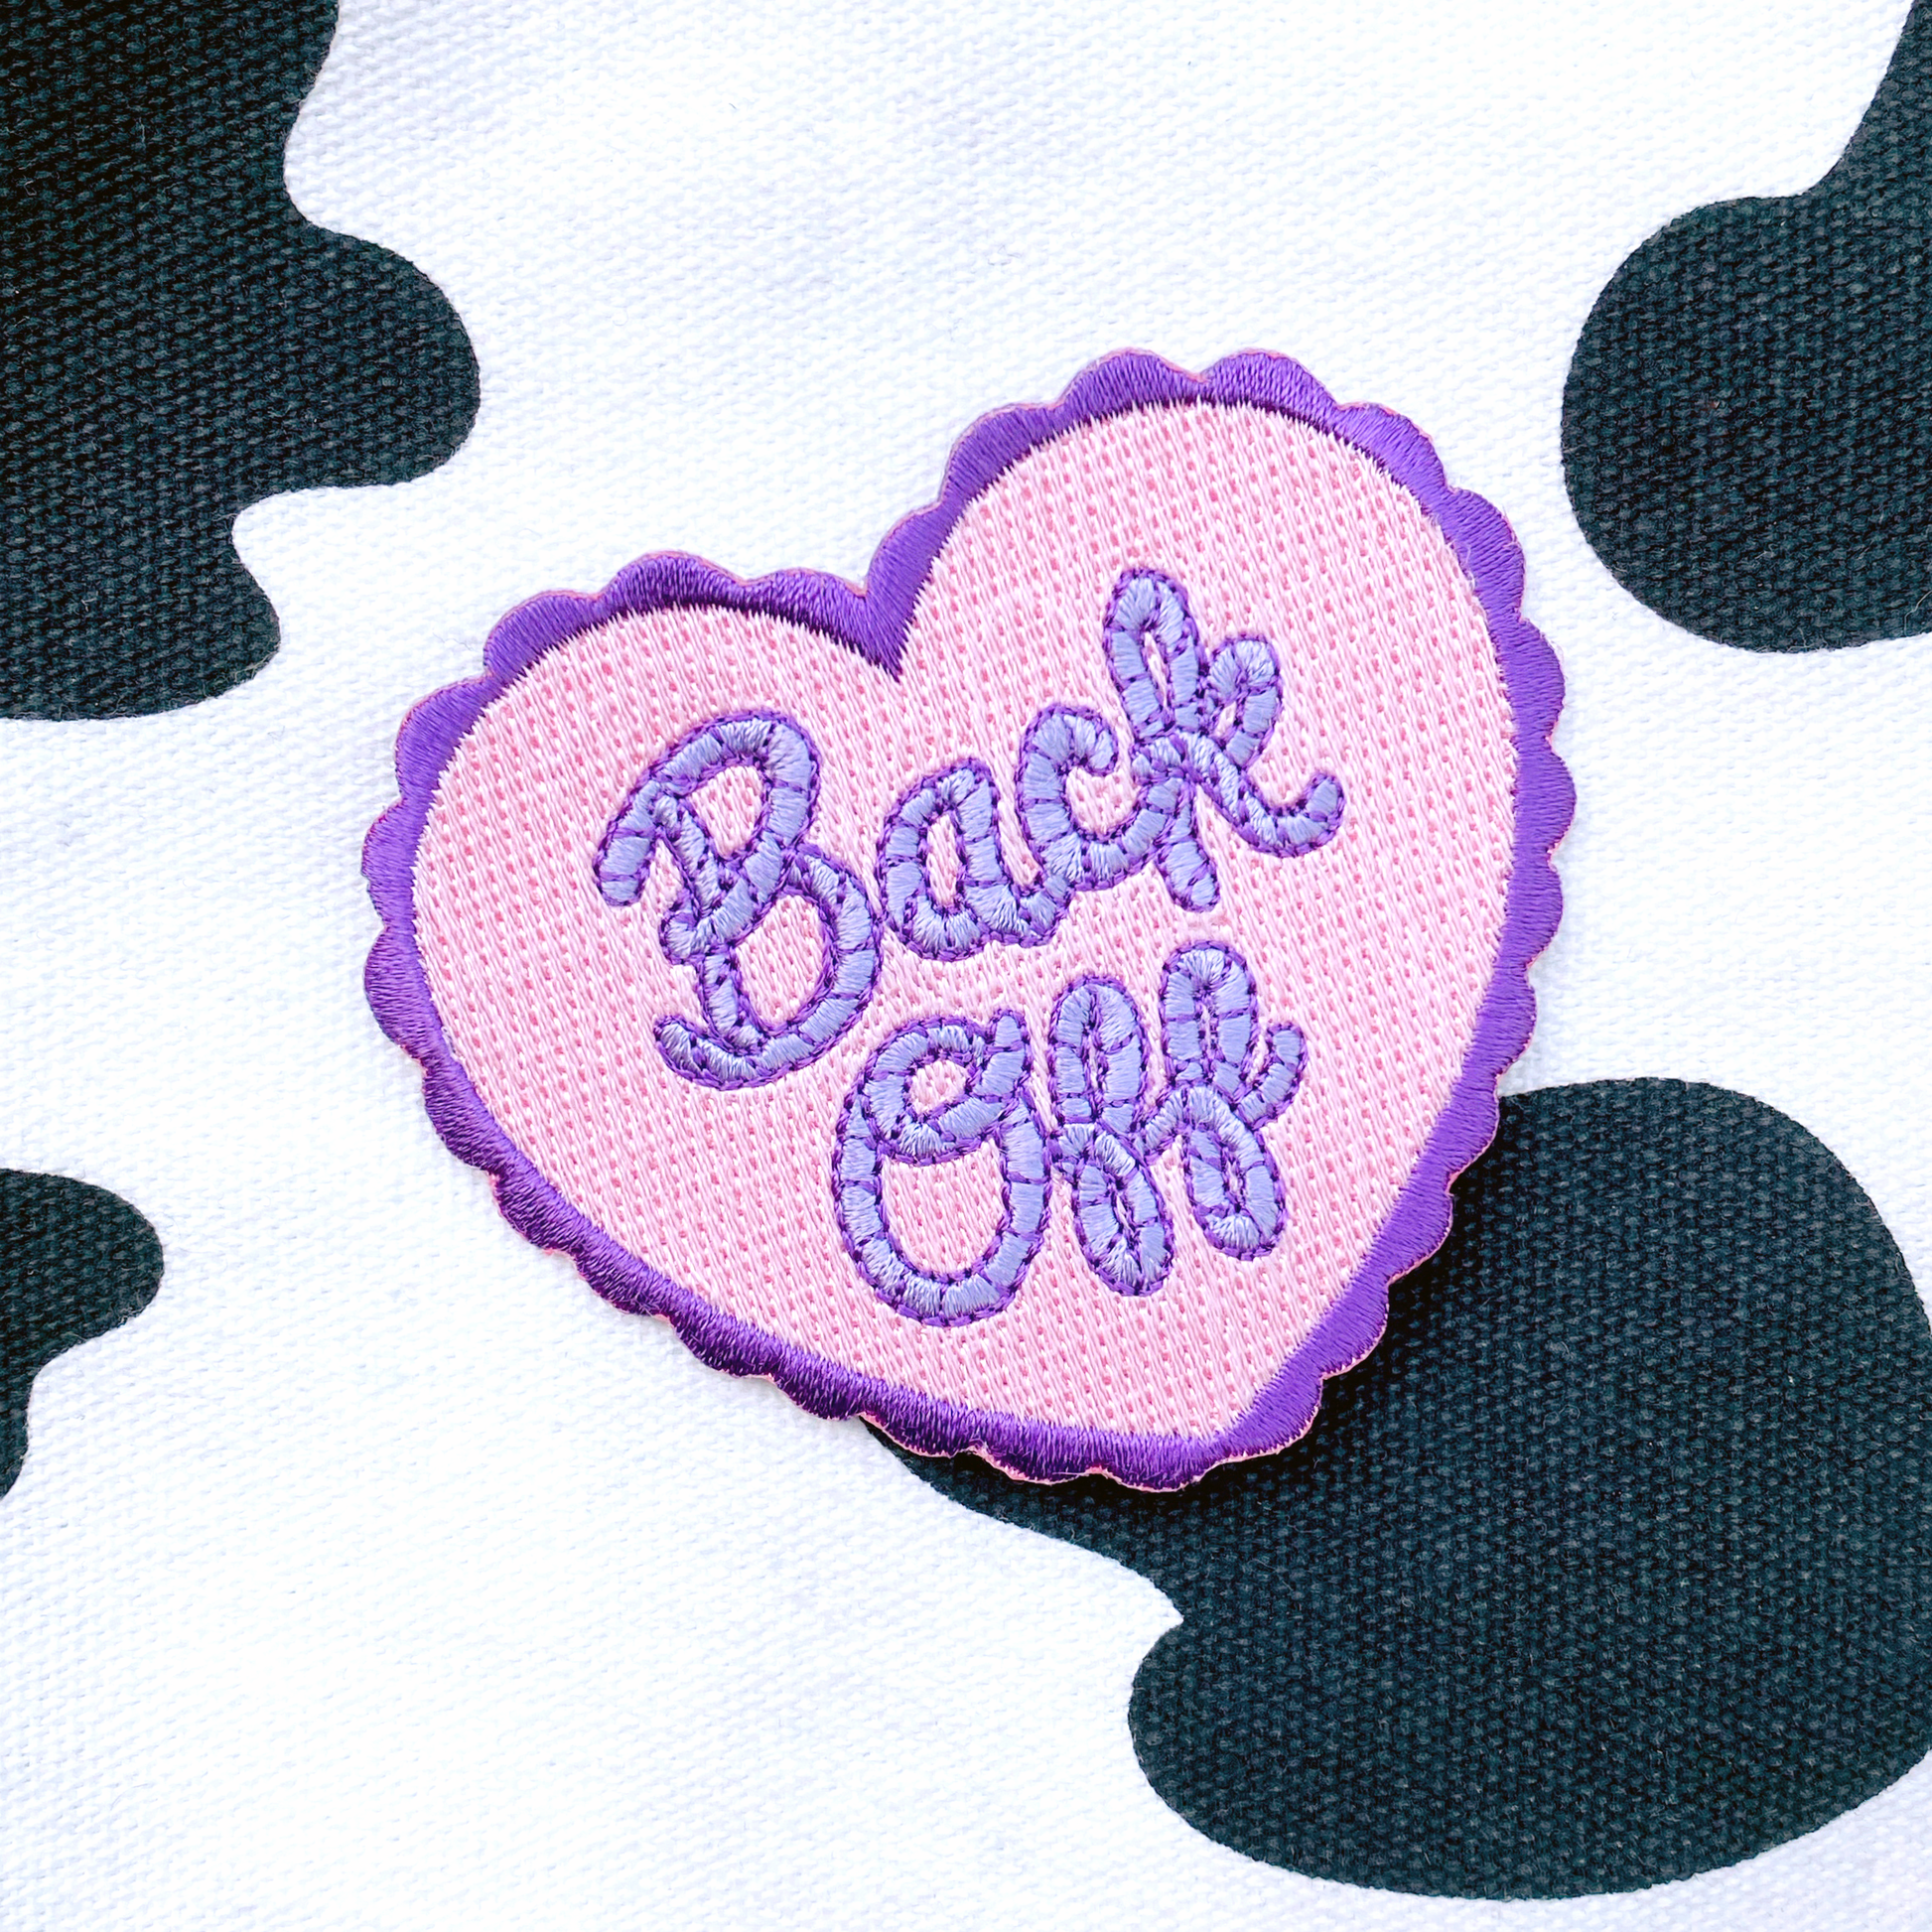 Pink and purple heart shaped embroidered patch with the quote "Back Off" in cursive photographed against a black and white cow print background